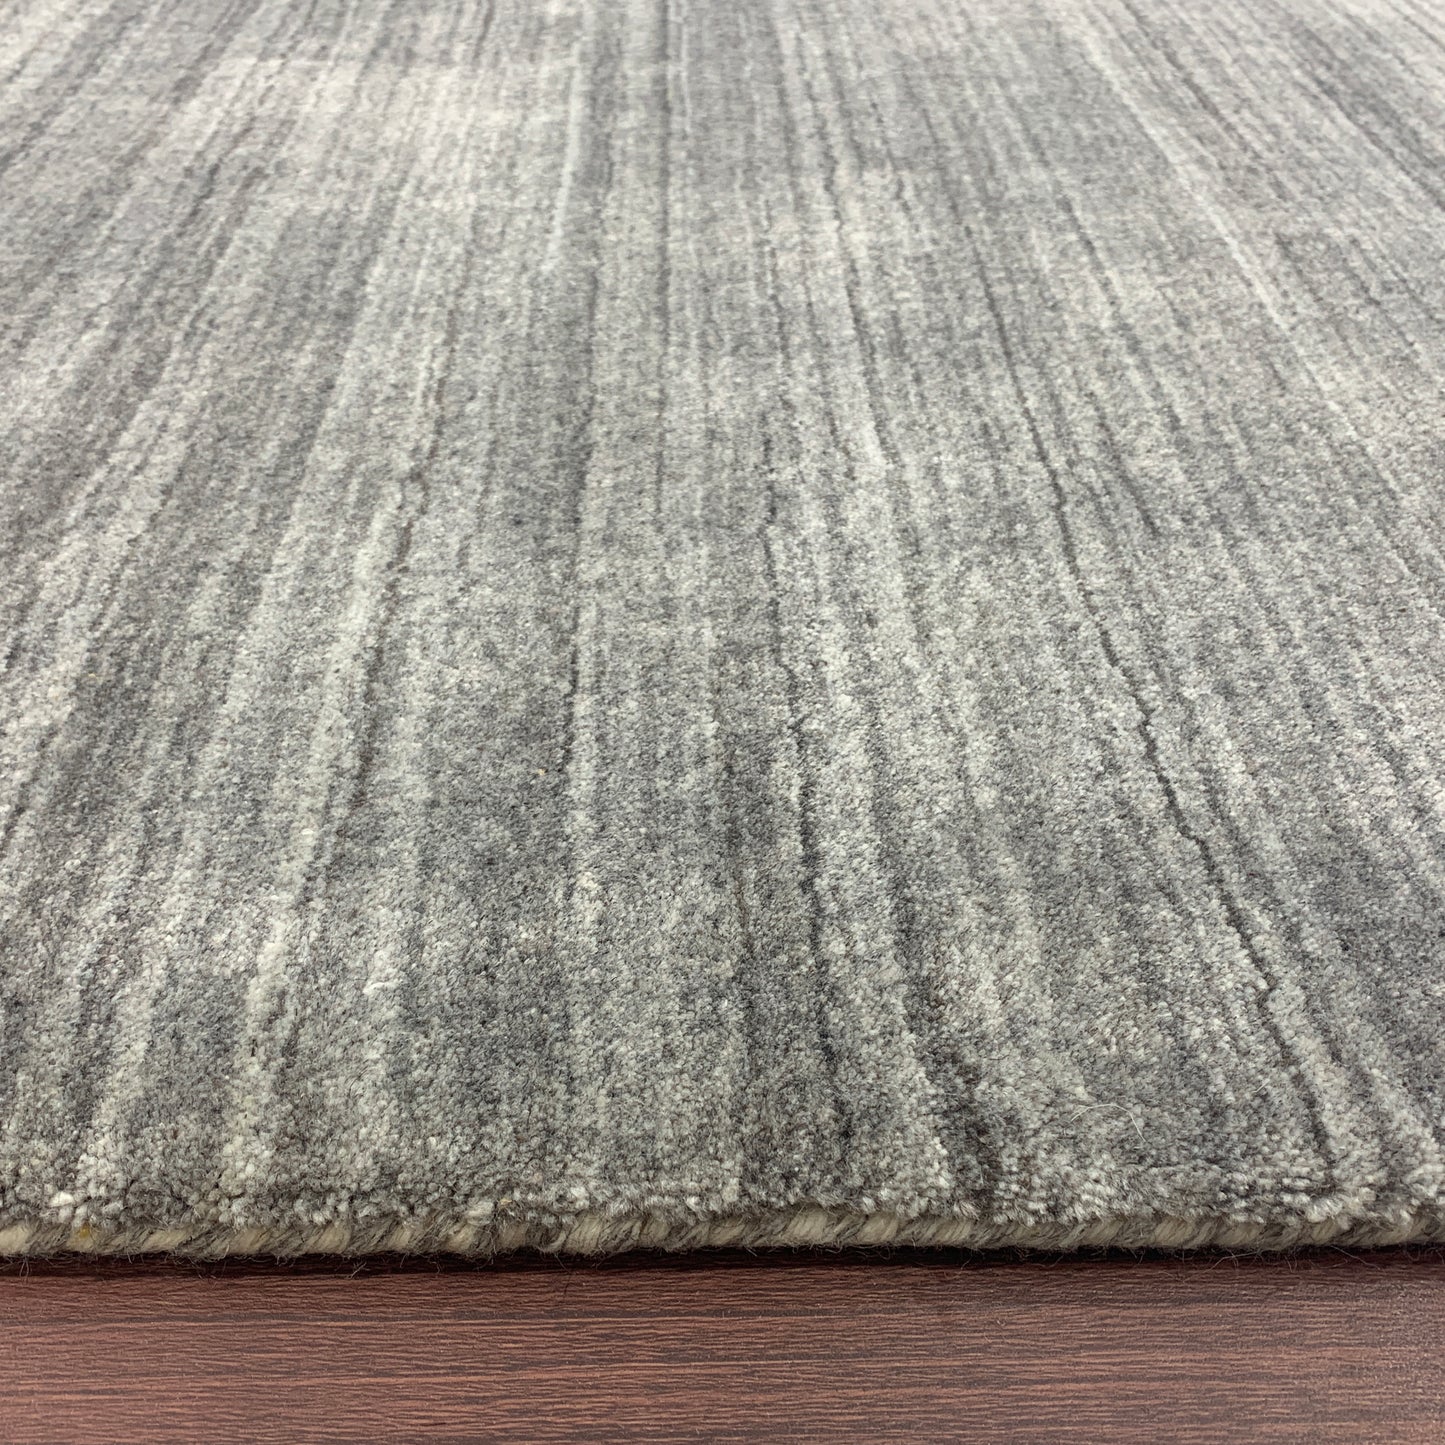 Grey, High Shine, Plush Pile, Viscose and Wool Blended, Modern Solid Handloom Area Rug